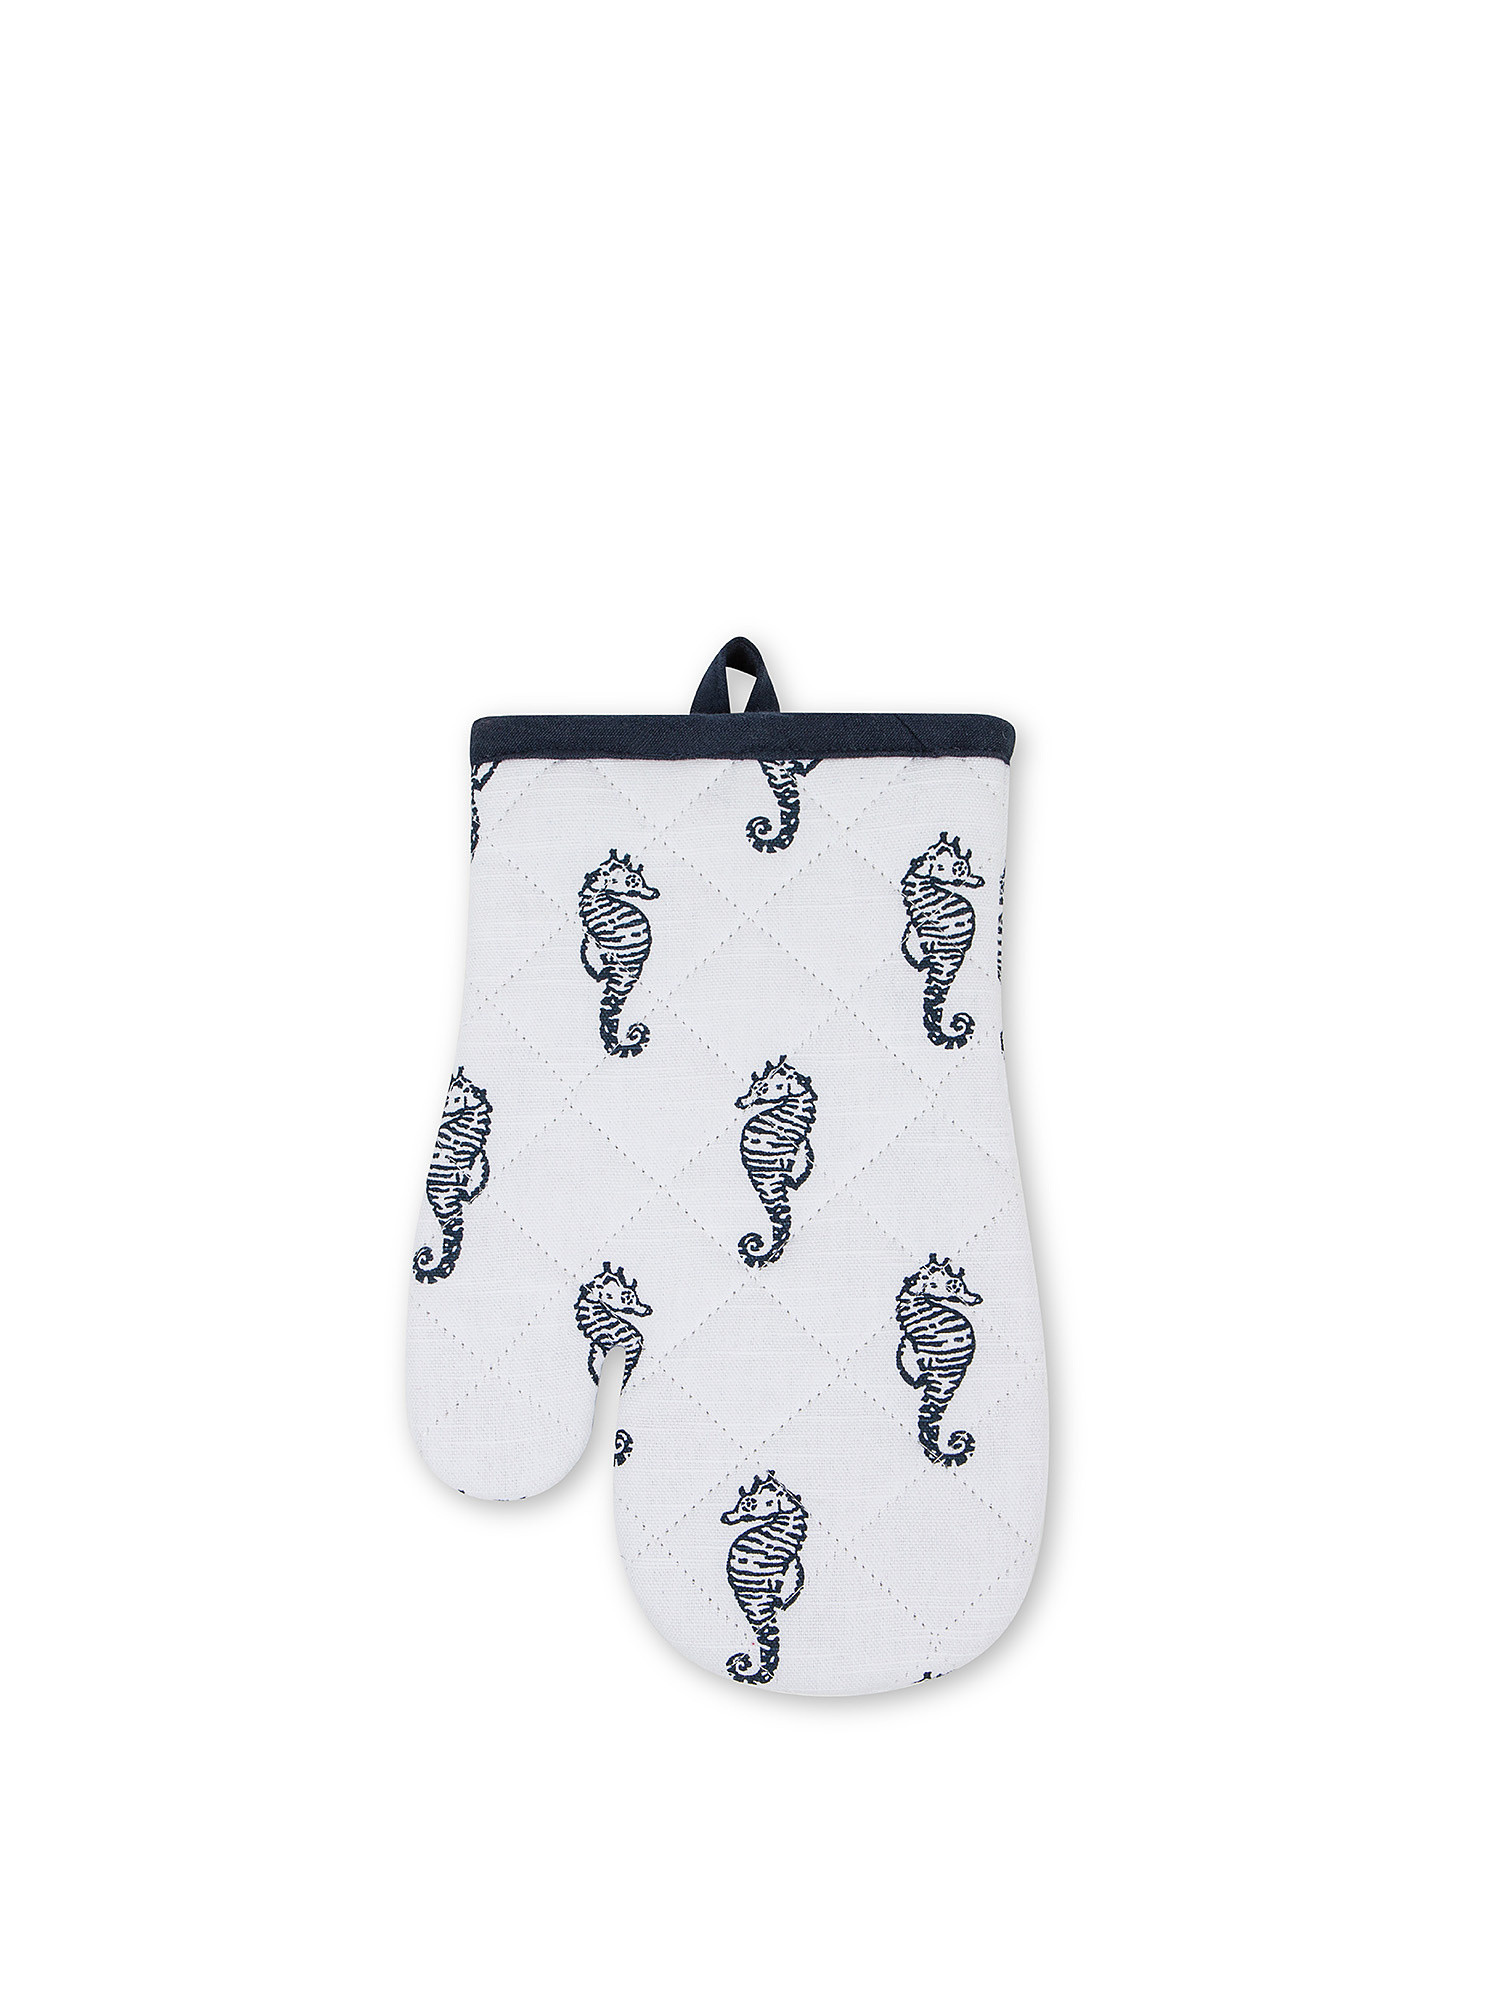 Cooking glove with seahorses in slub cotton., White / Blue, large image number 0